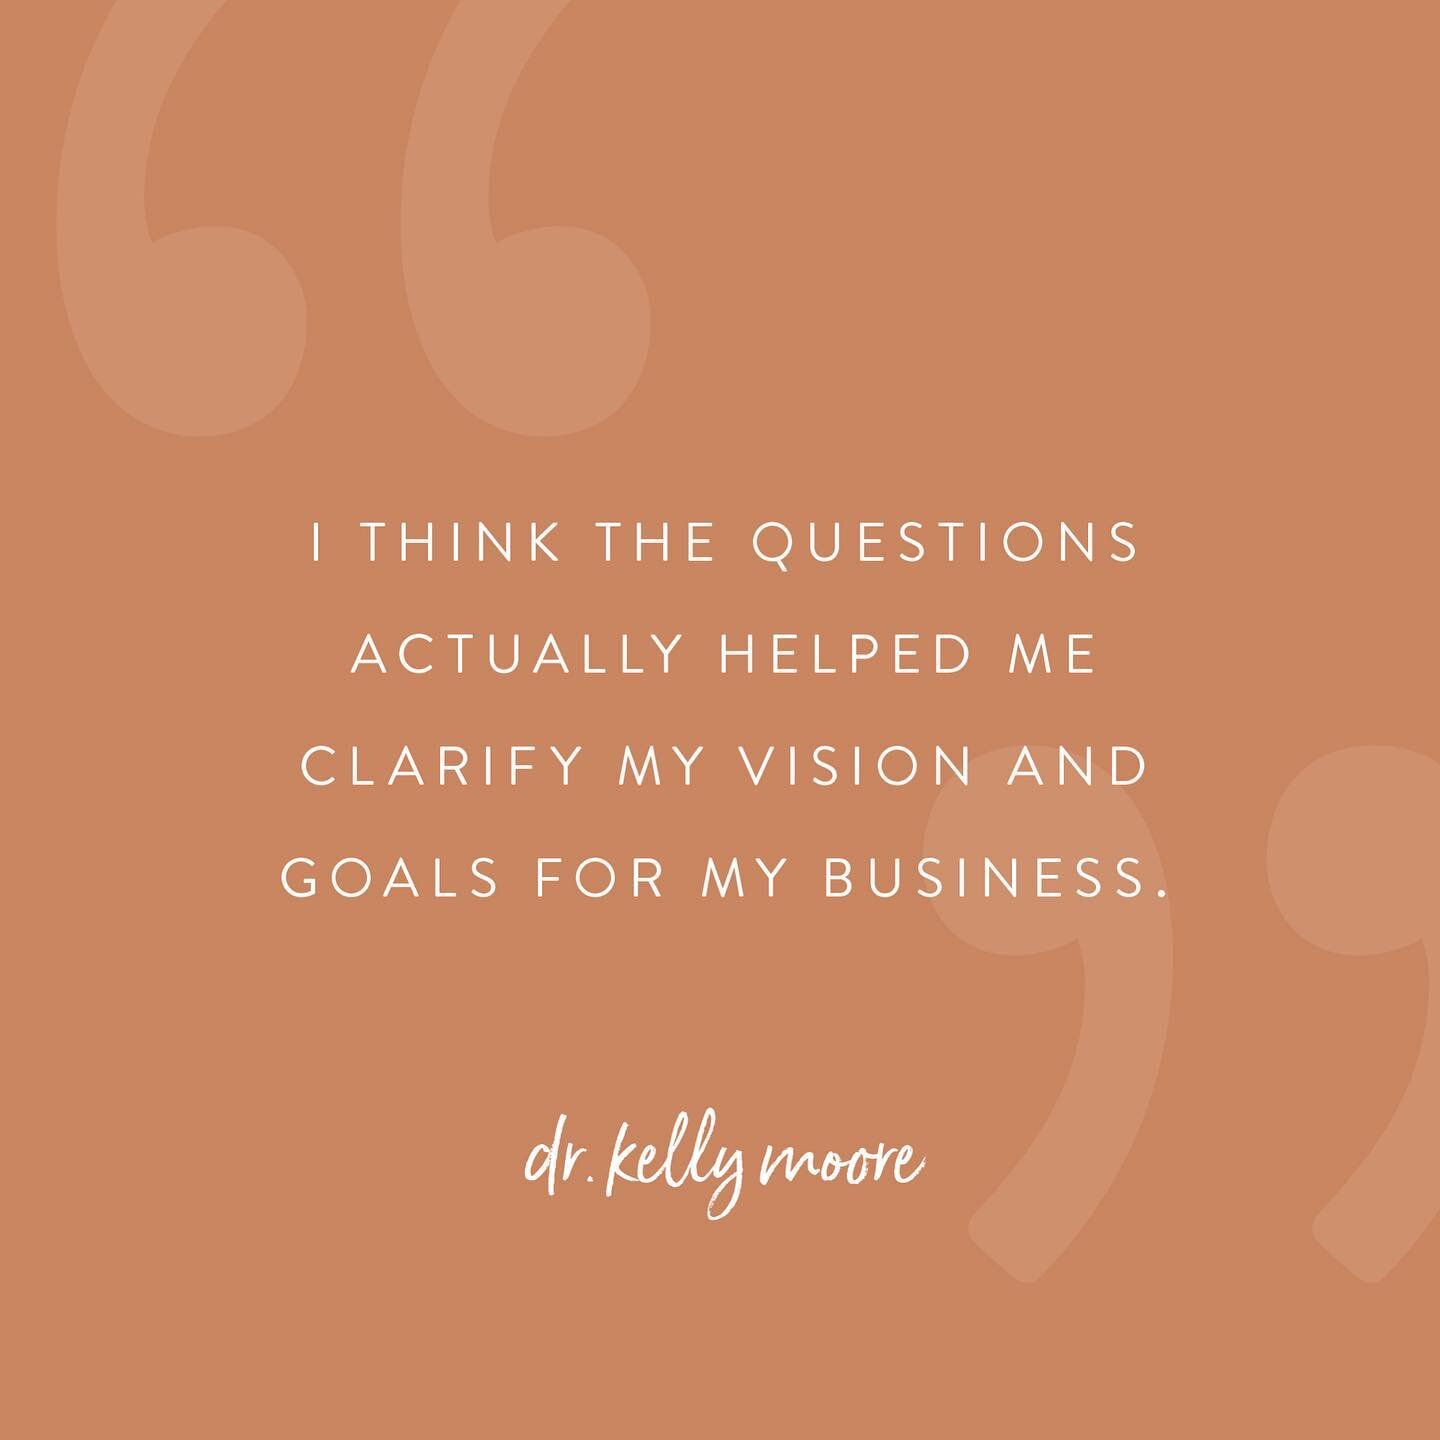 Not to toot our own horn, but this was not the first time we've heard this sentiment from a client!

Our discovery process is now streamlined through our Brand Breakthrough: a deep dive workshop where we learn the story of your business &mdash; your 